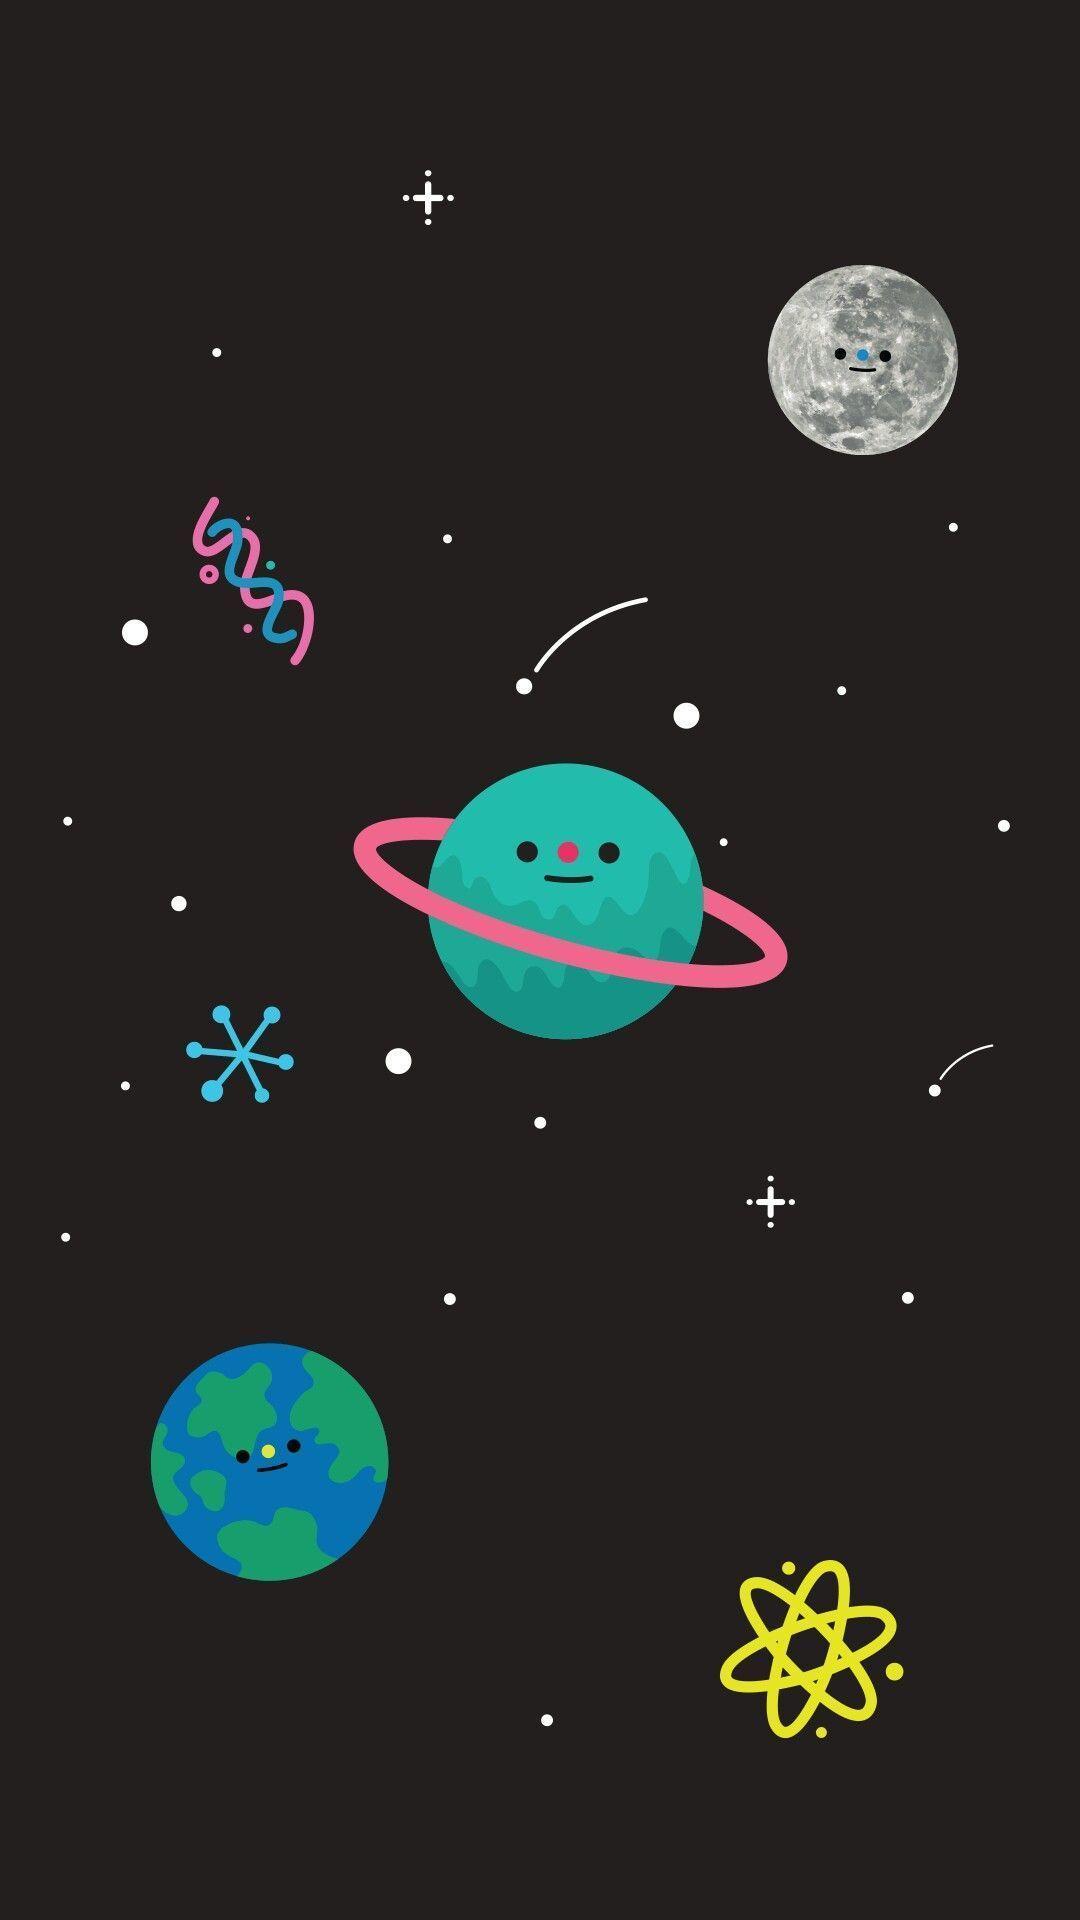 Aesthetic Little Space Wallpapers